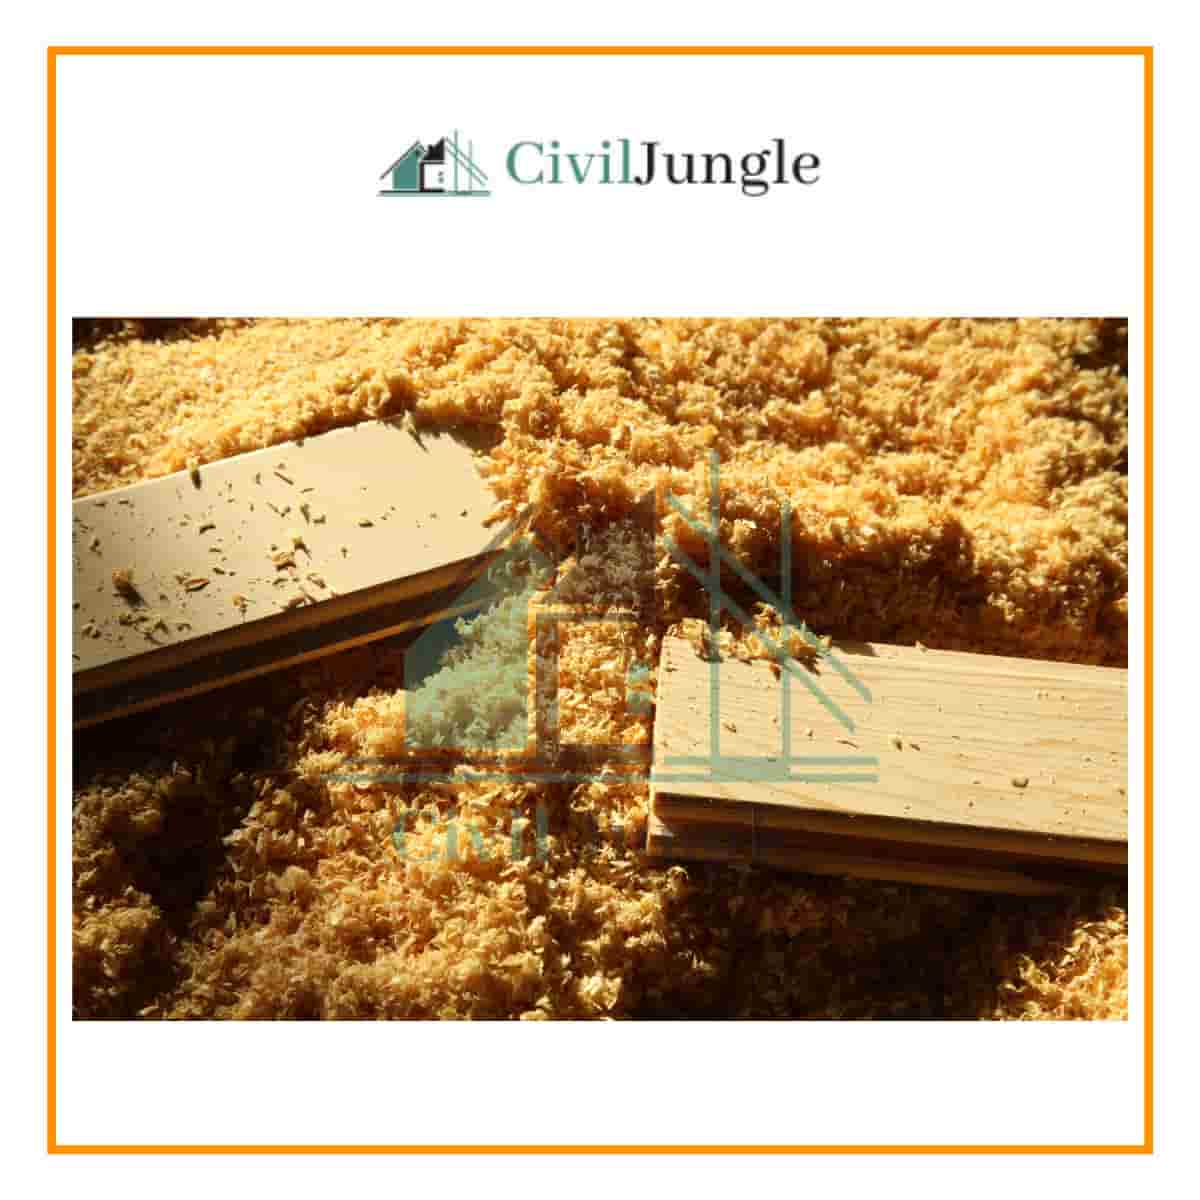 Construction Material: Timber and Wood